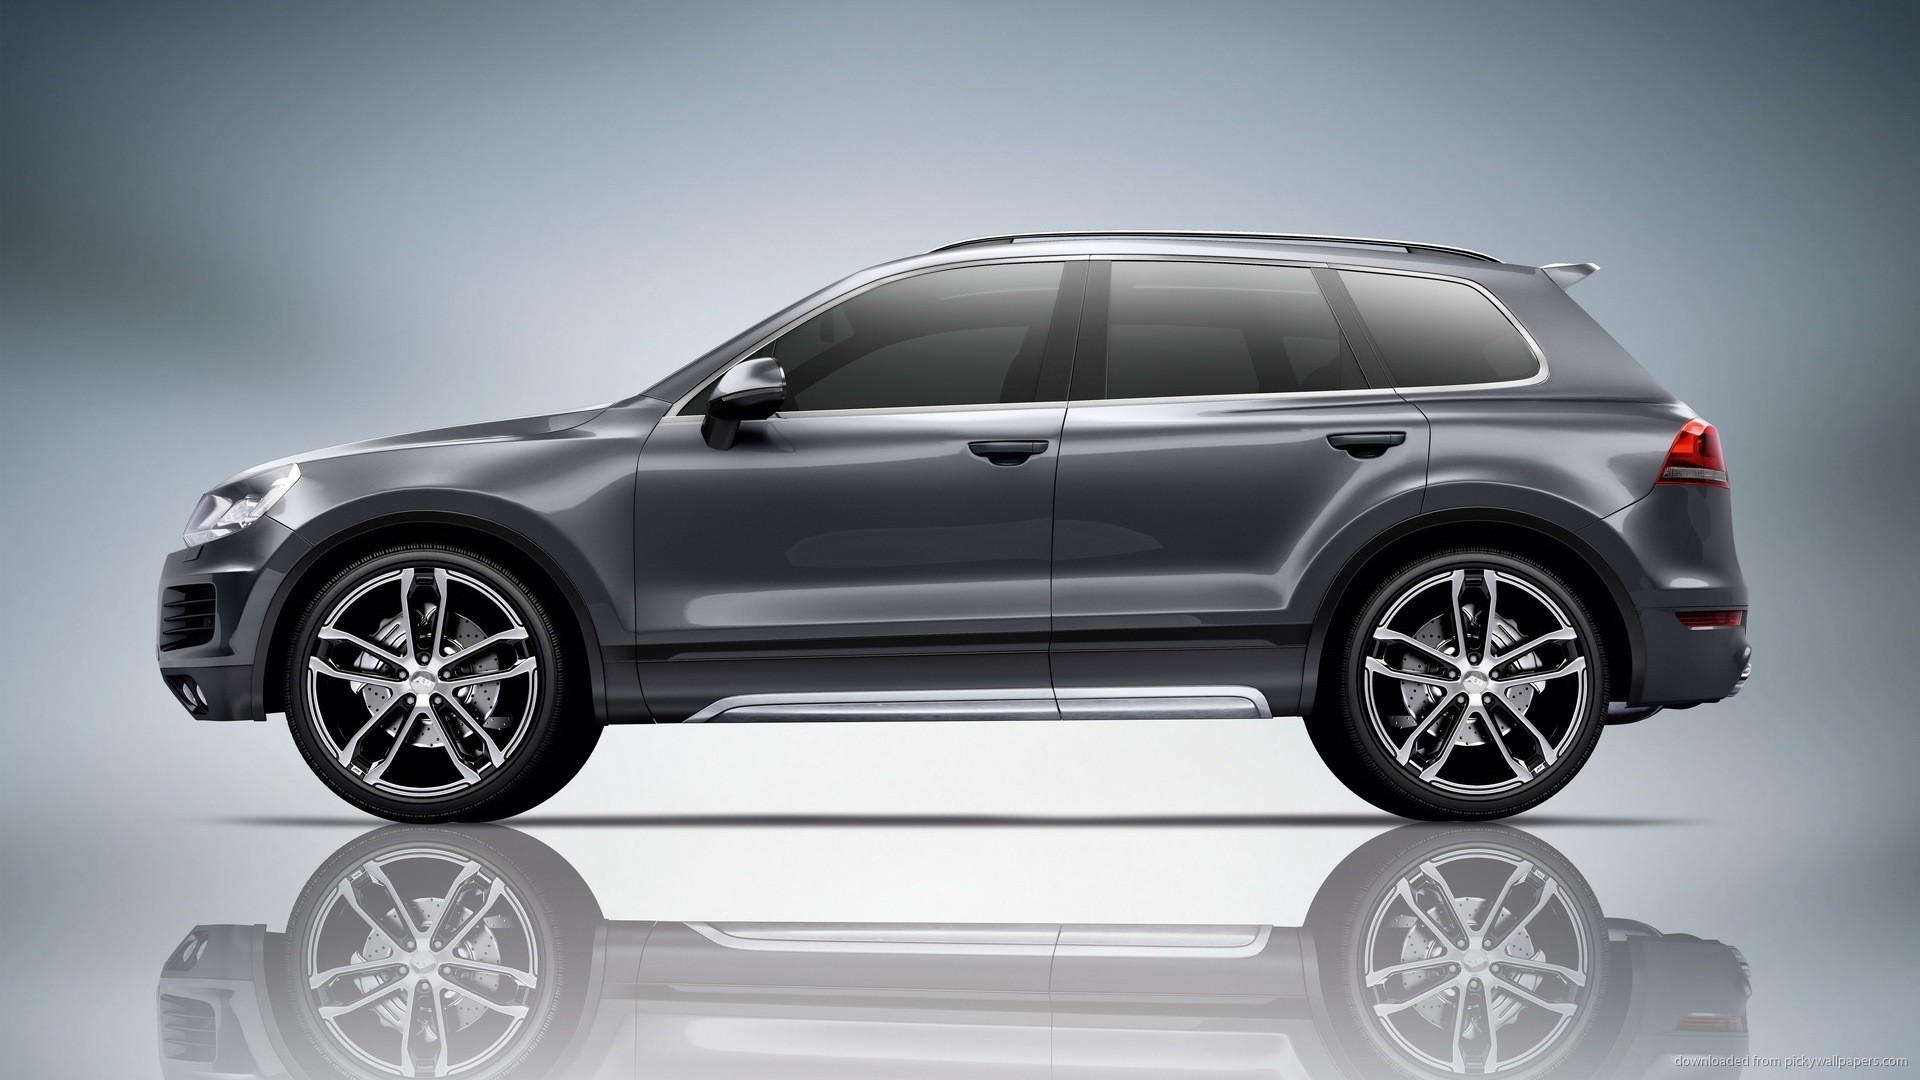 1920x1080 Volkswagen Touareg Side View Wallpaper picture